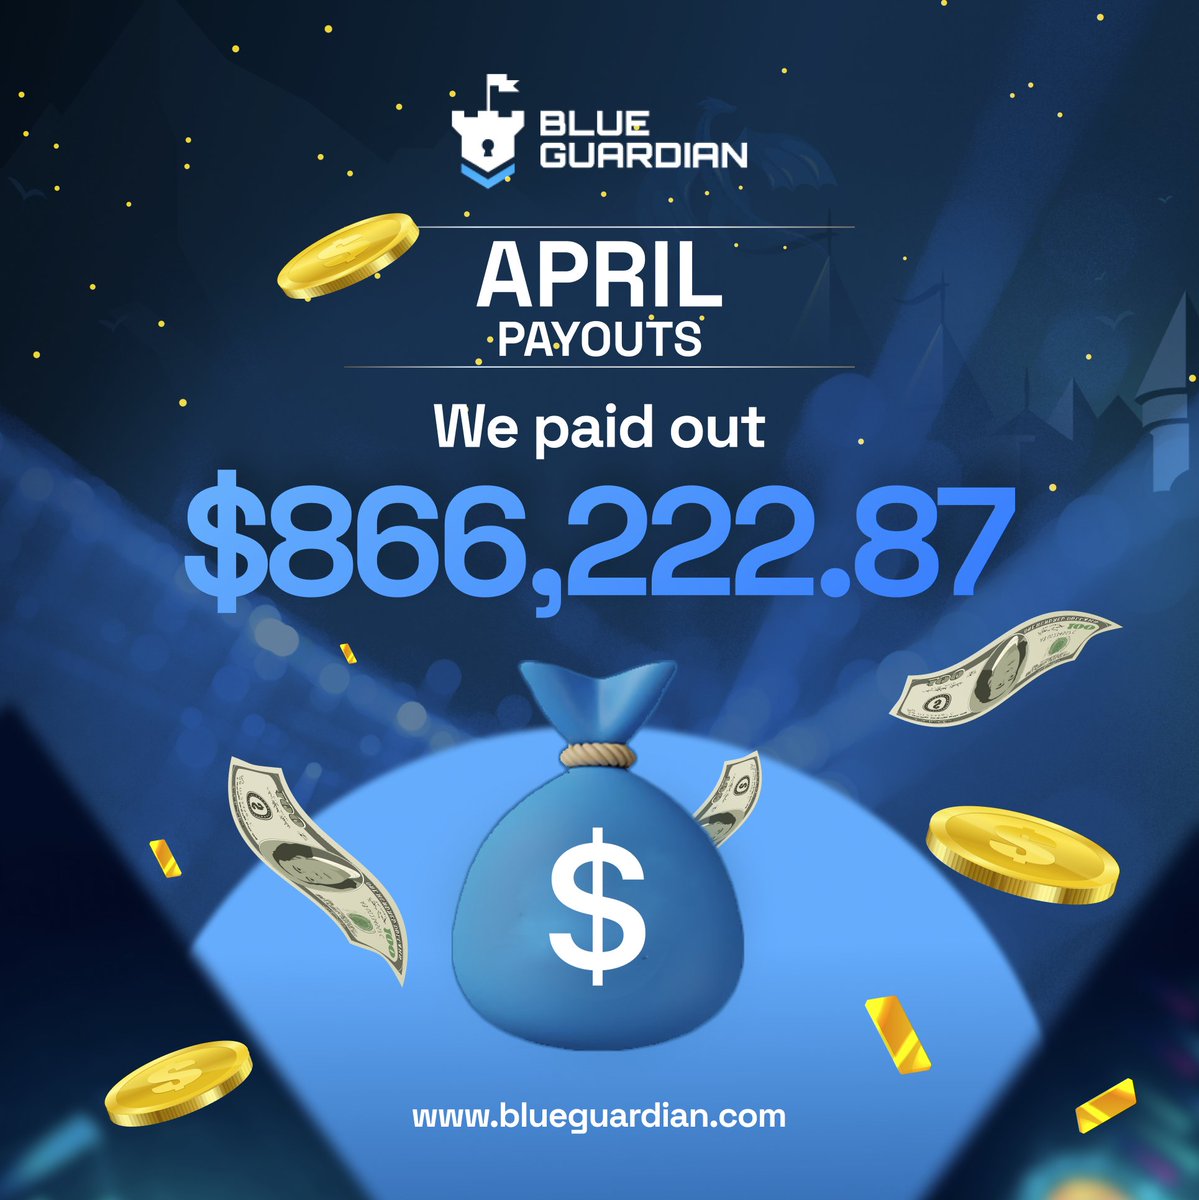 In April, we paid out a massive $866,222.87 Hats off to our incredible traders! 💙